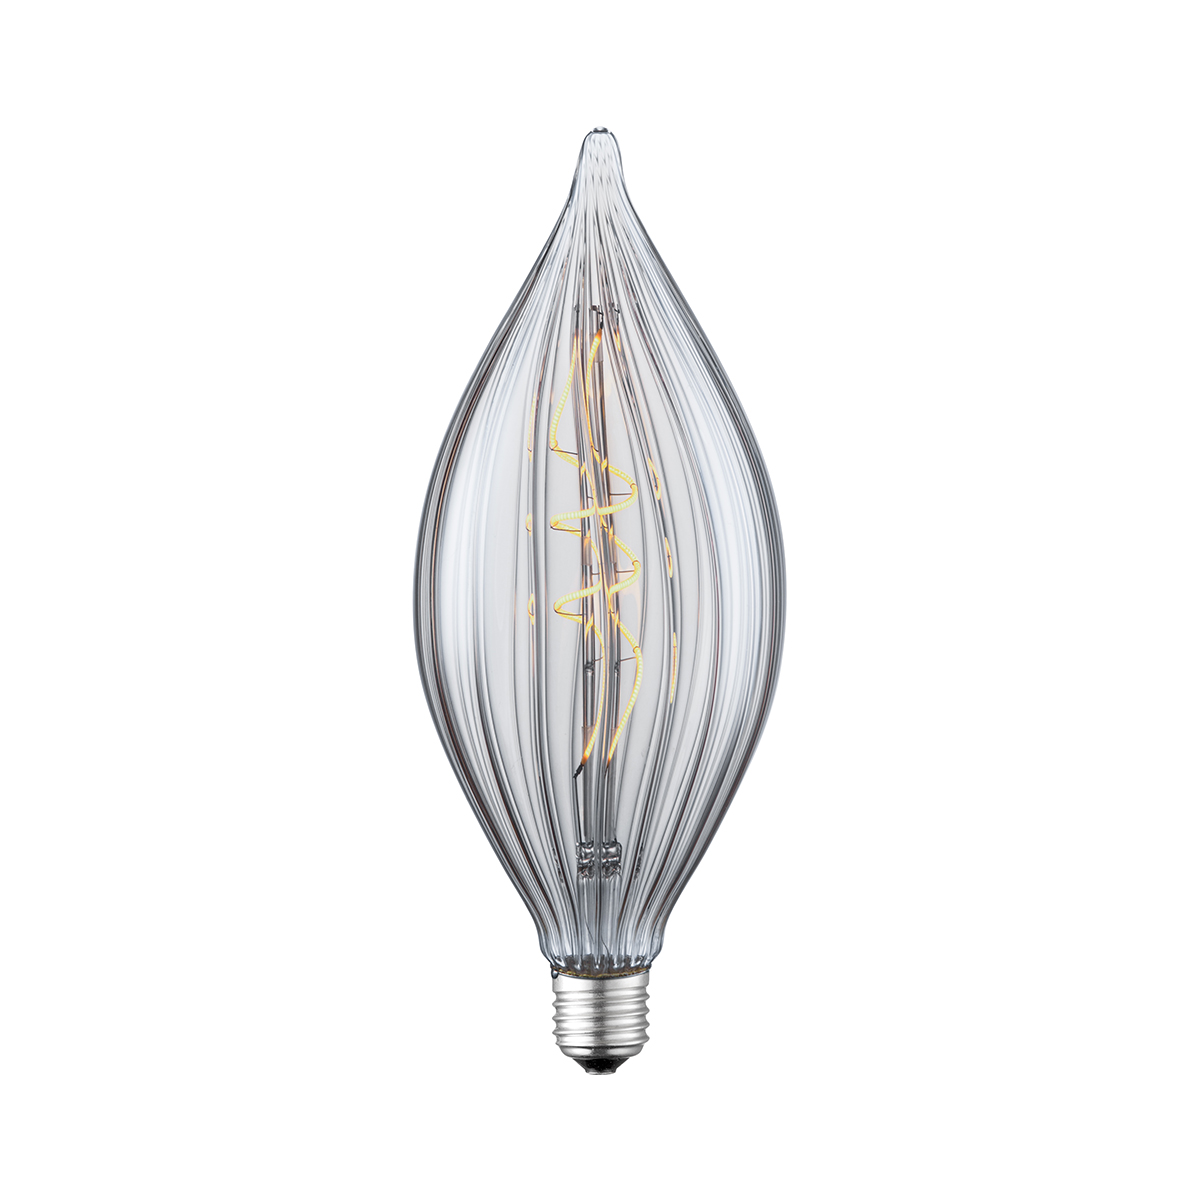 Tangla lighting - TLB-8110-04CL - LED Light Bulb Single Spiral filament - special 4W clear - seed - dimmable - E27